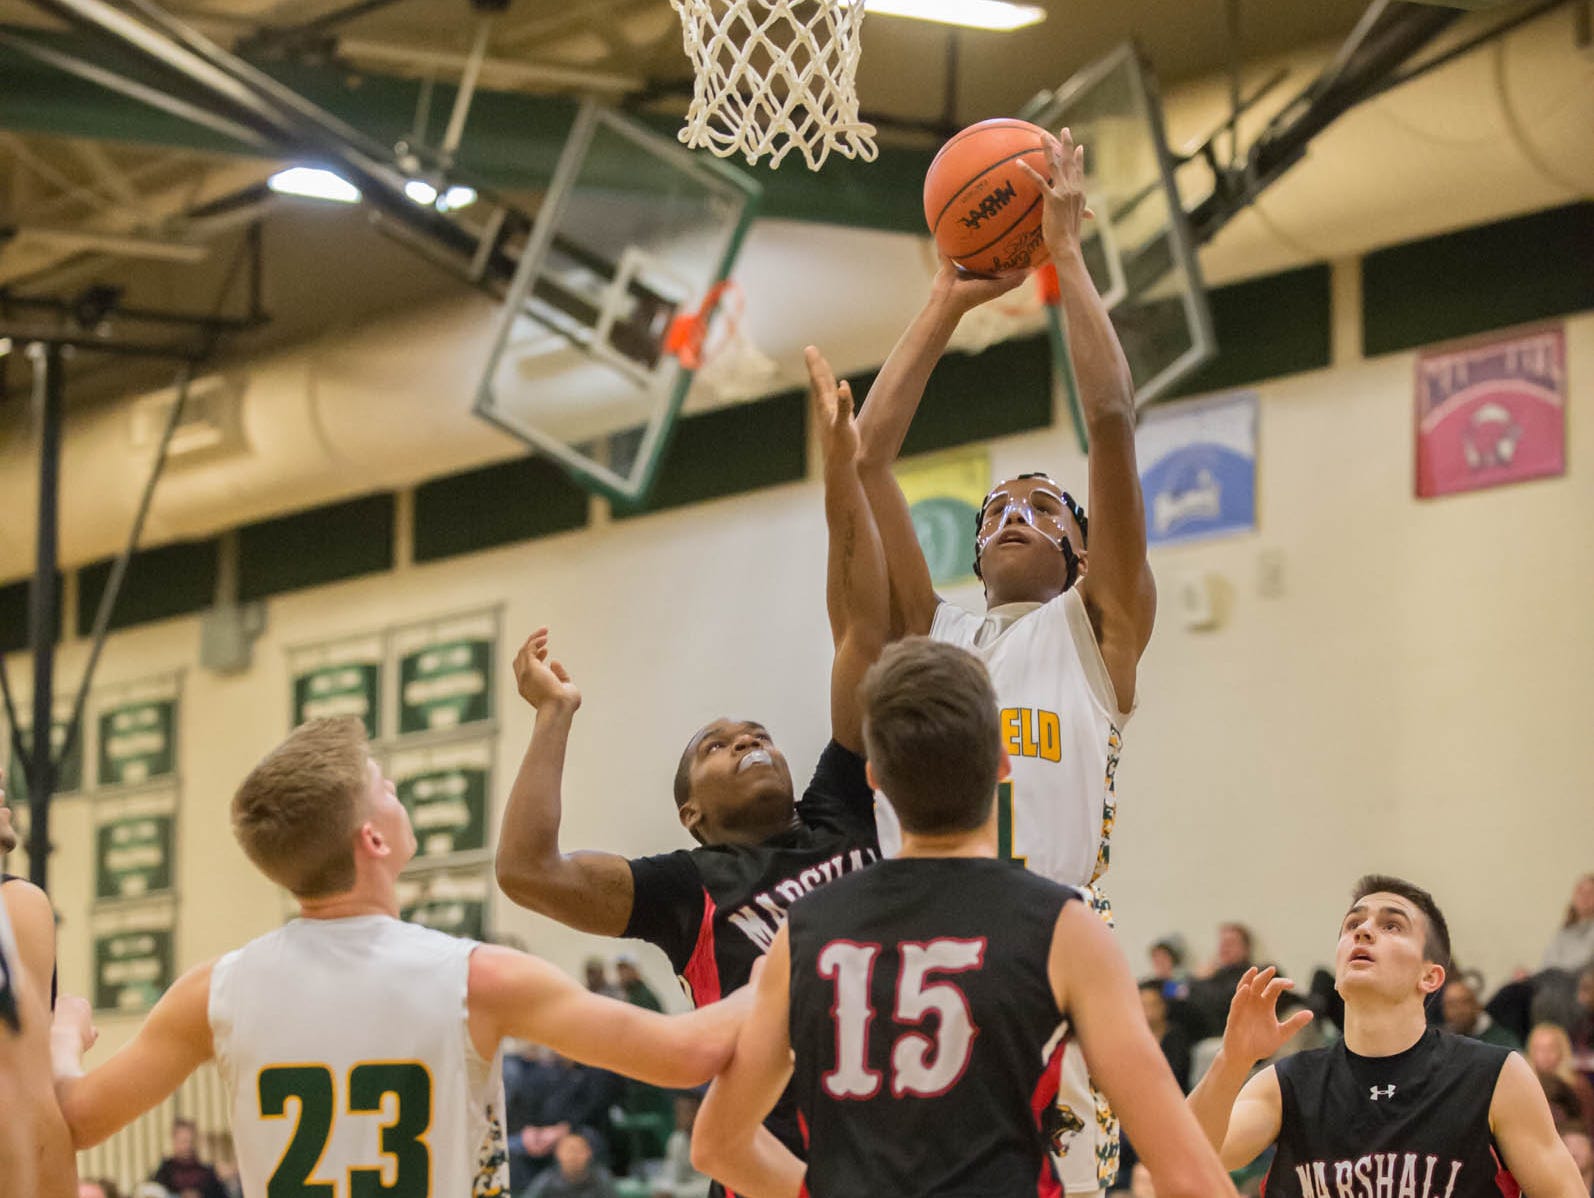 Pennfield's Francois Jamierson (11) goes for the hoop during Friday night's game.